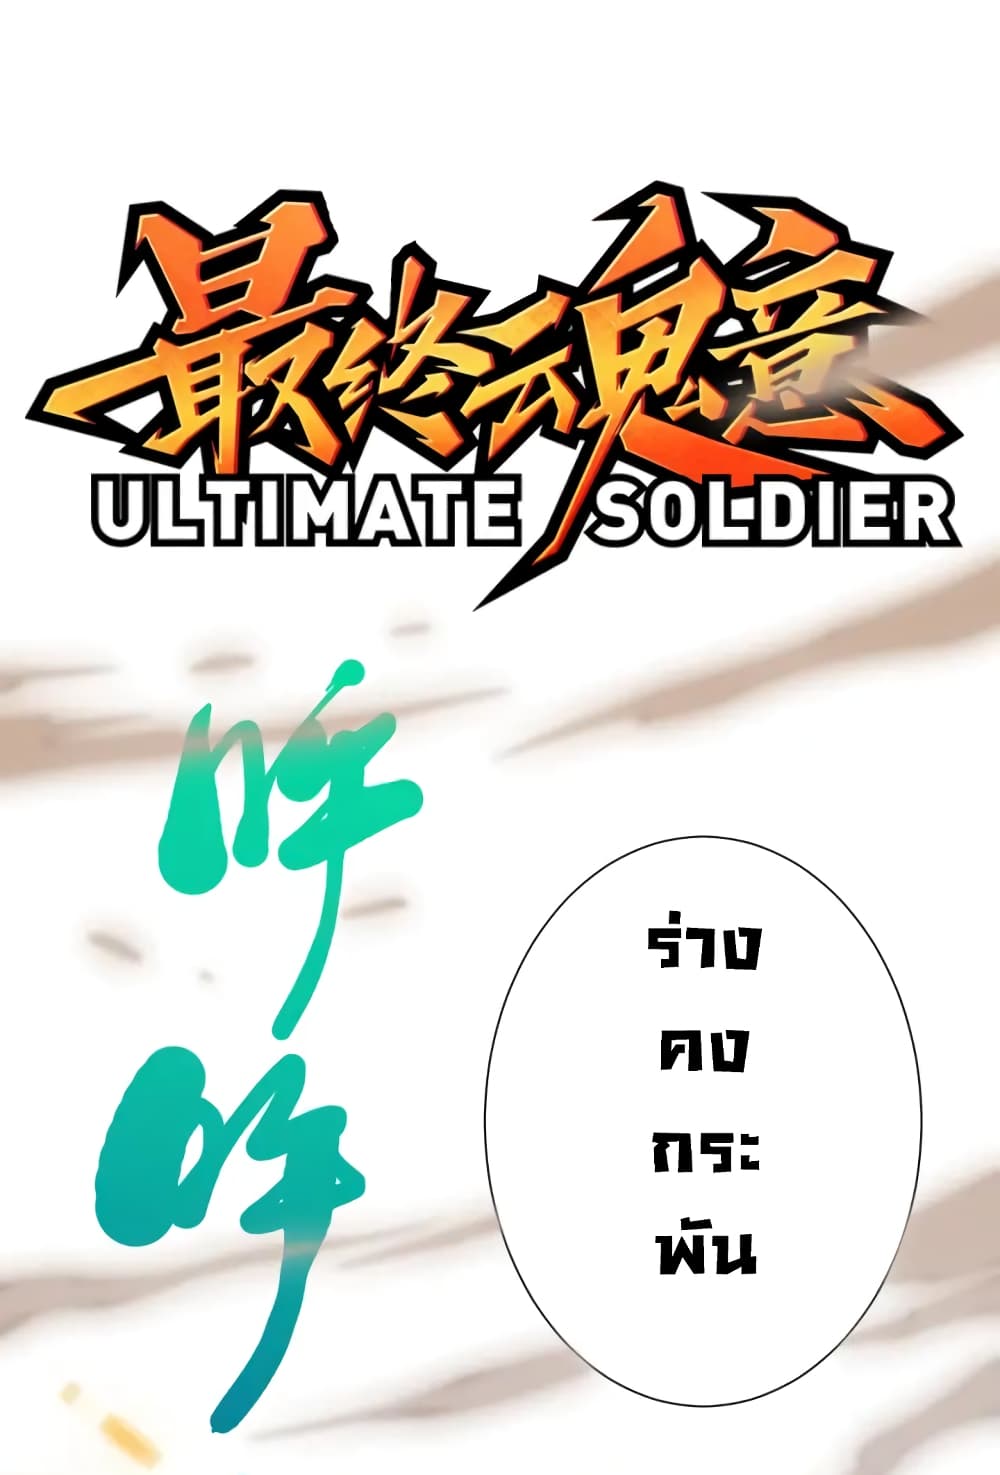 ULTIMATE SOLDIER 54-54